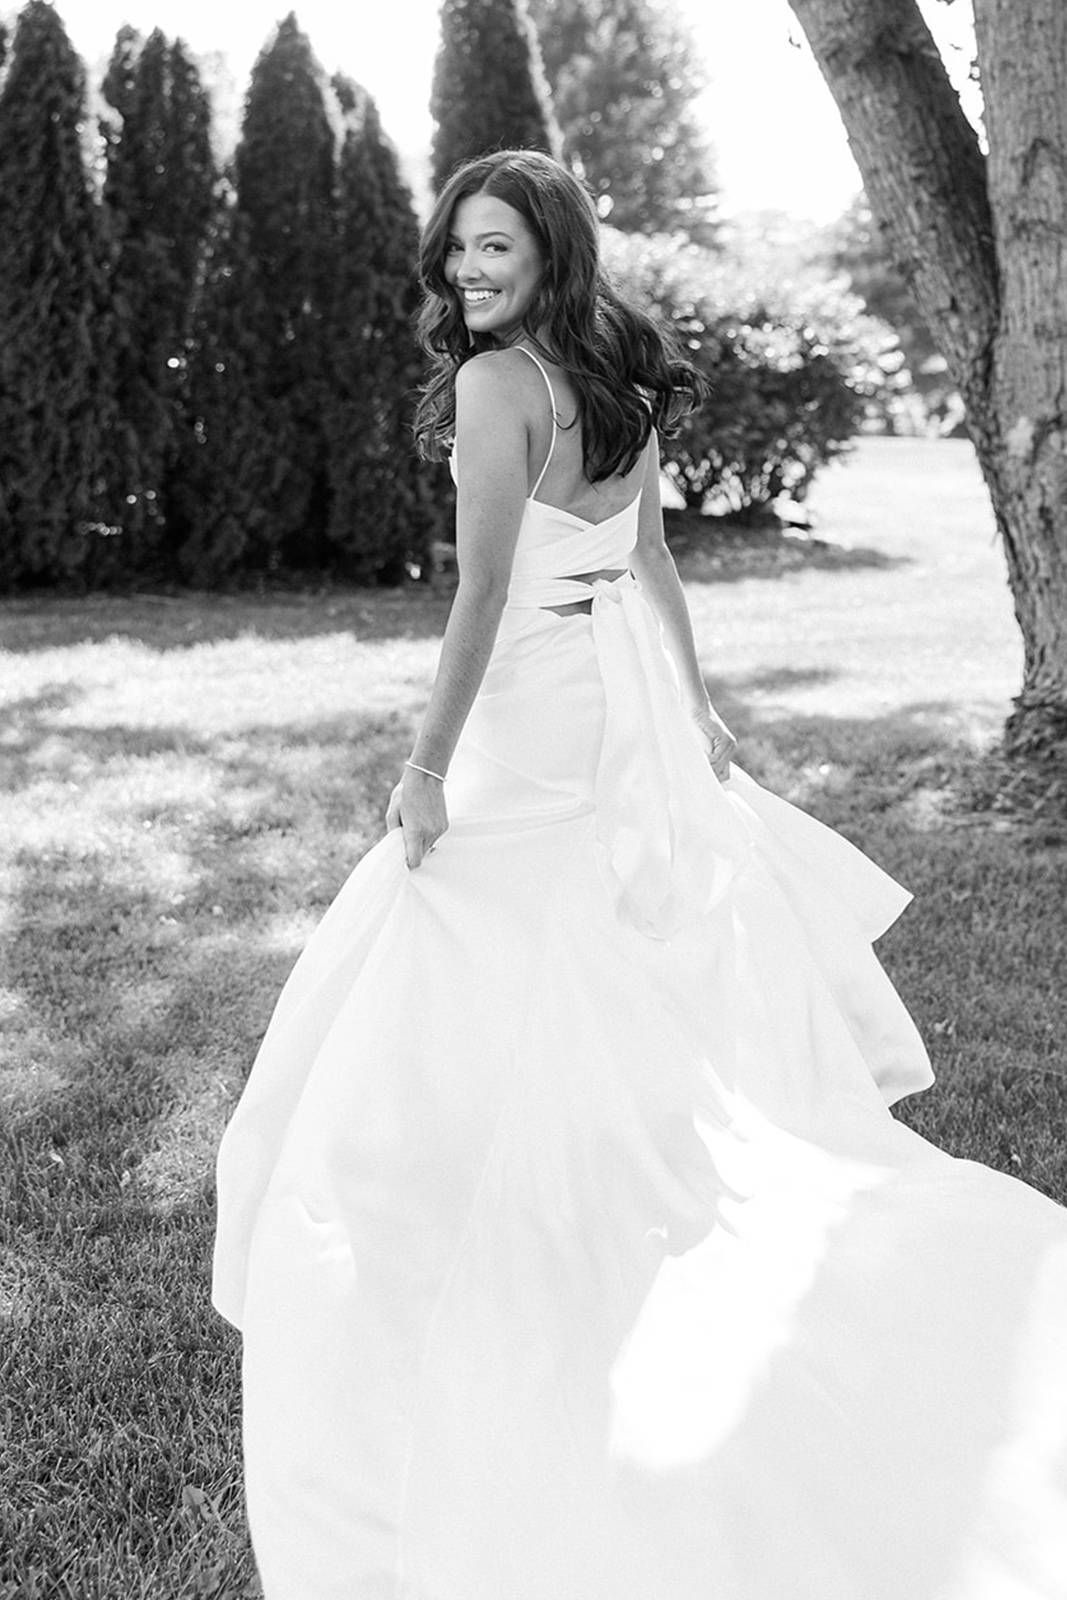 Bride in the Valentina gown with tie detailing